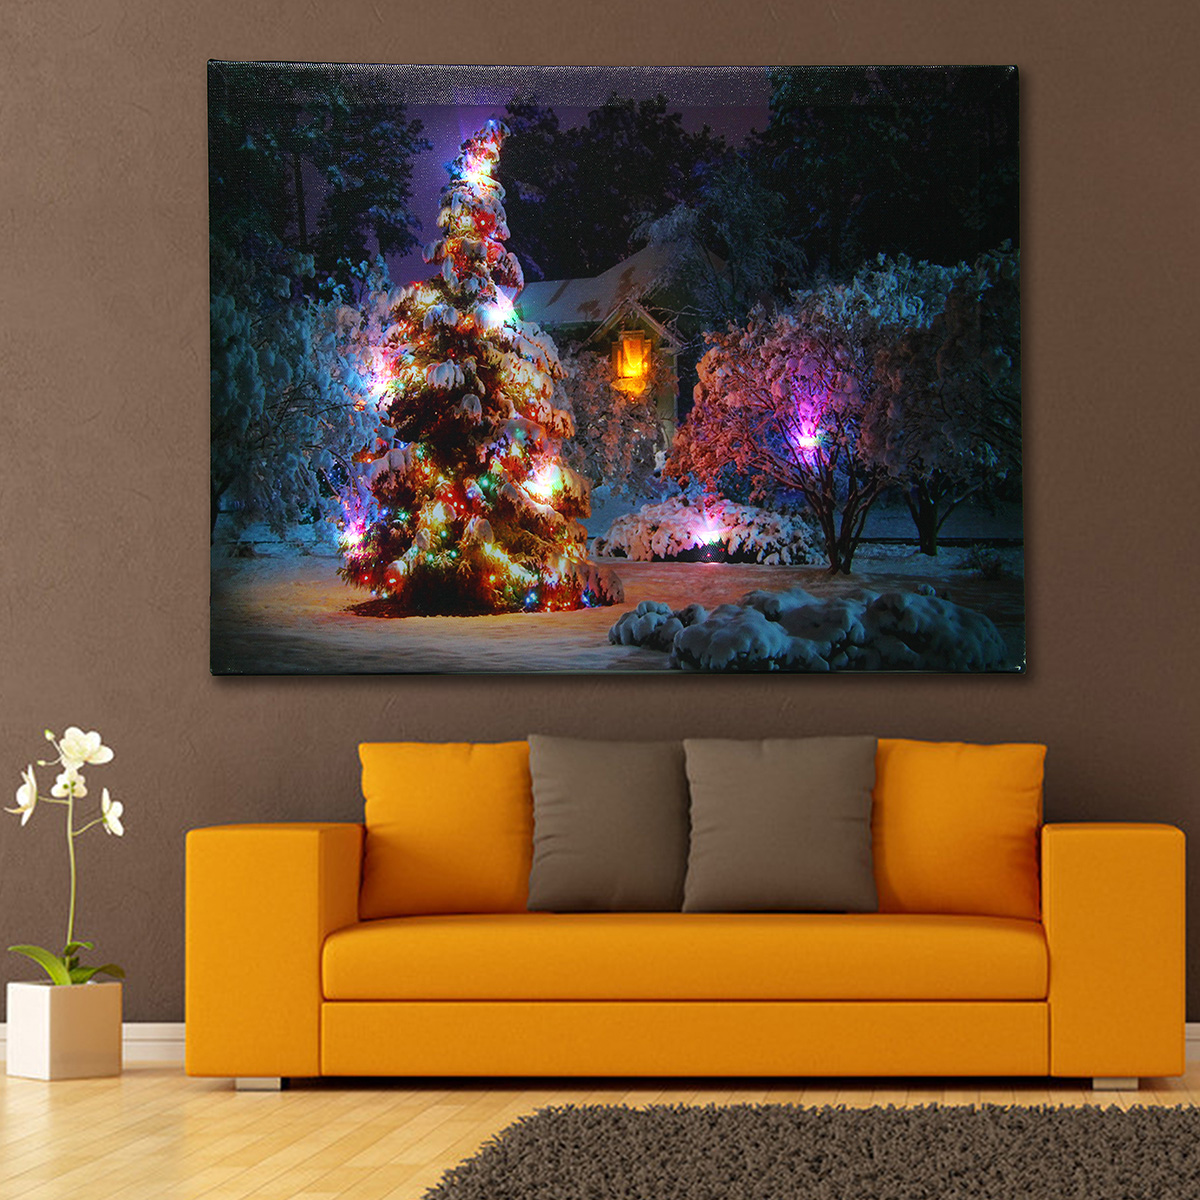 40-x-30cm-Battery-Operated-LED-Christmas-Snowy-House-Front-Tree-Xmas-Canvas-Print-Wall-Art-1109338